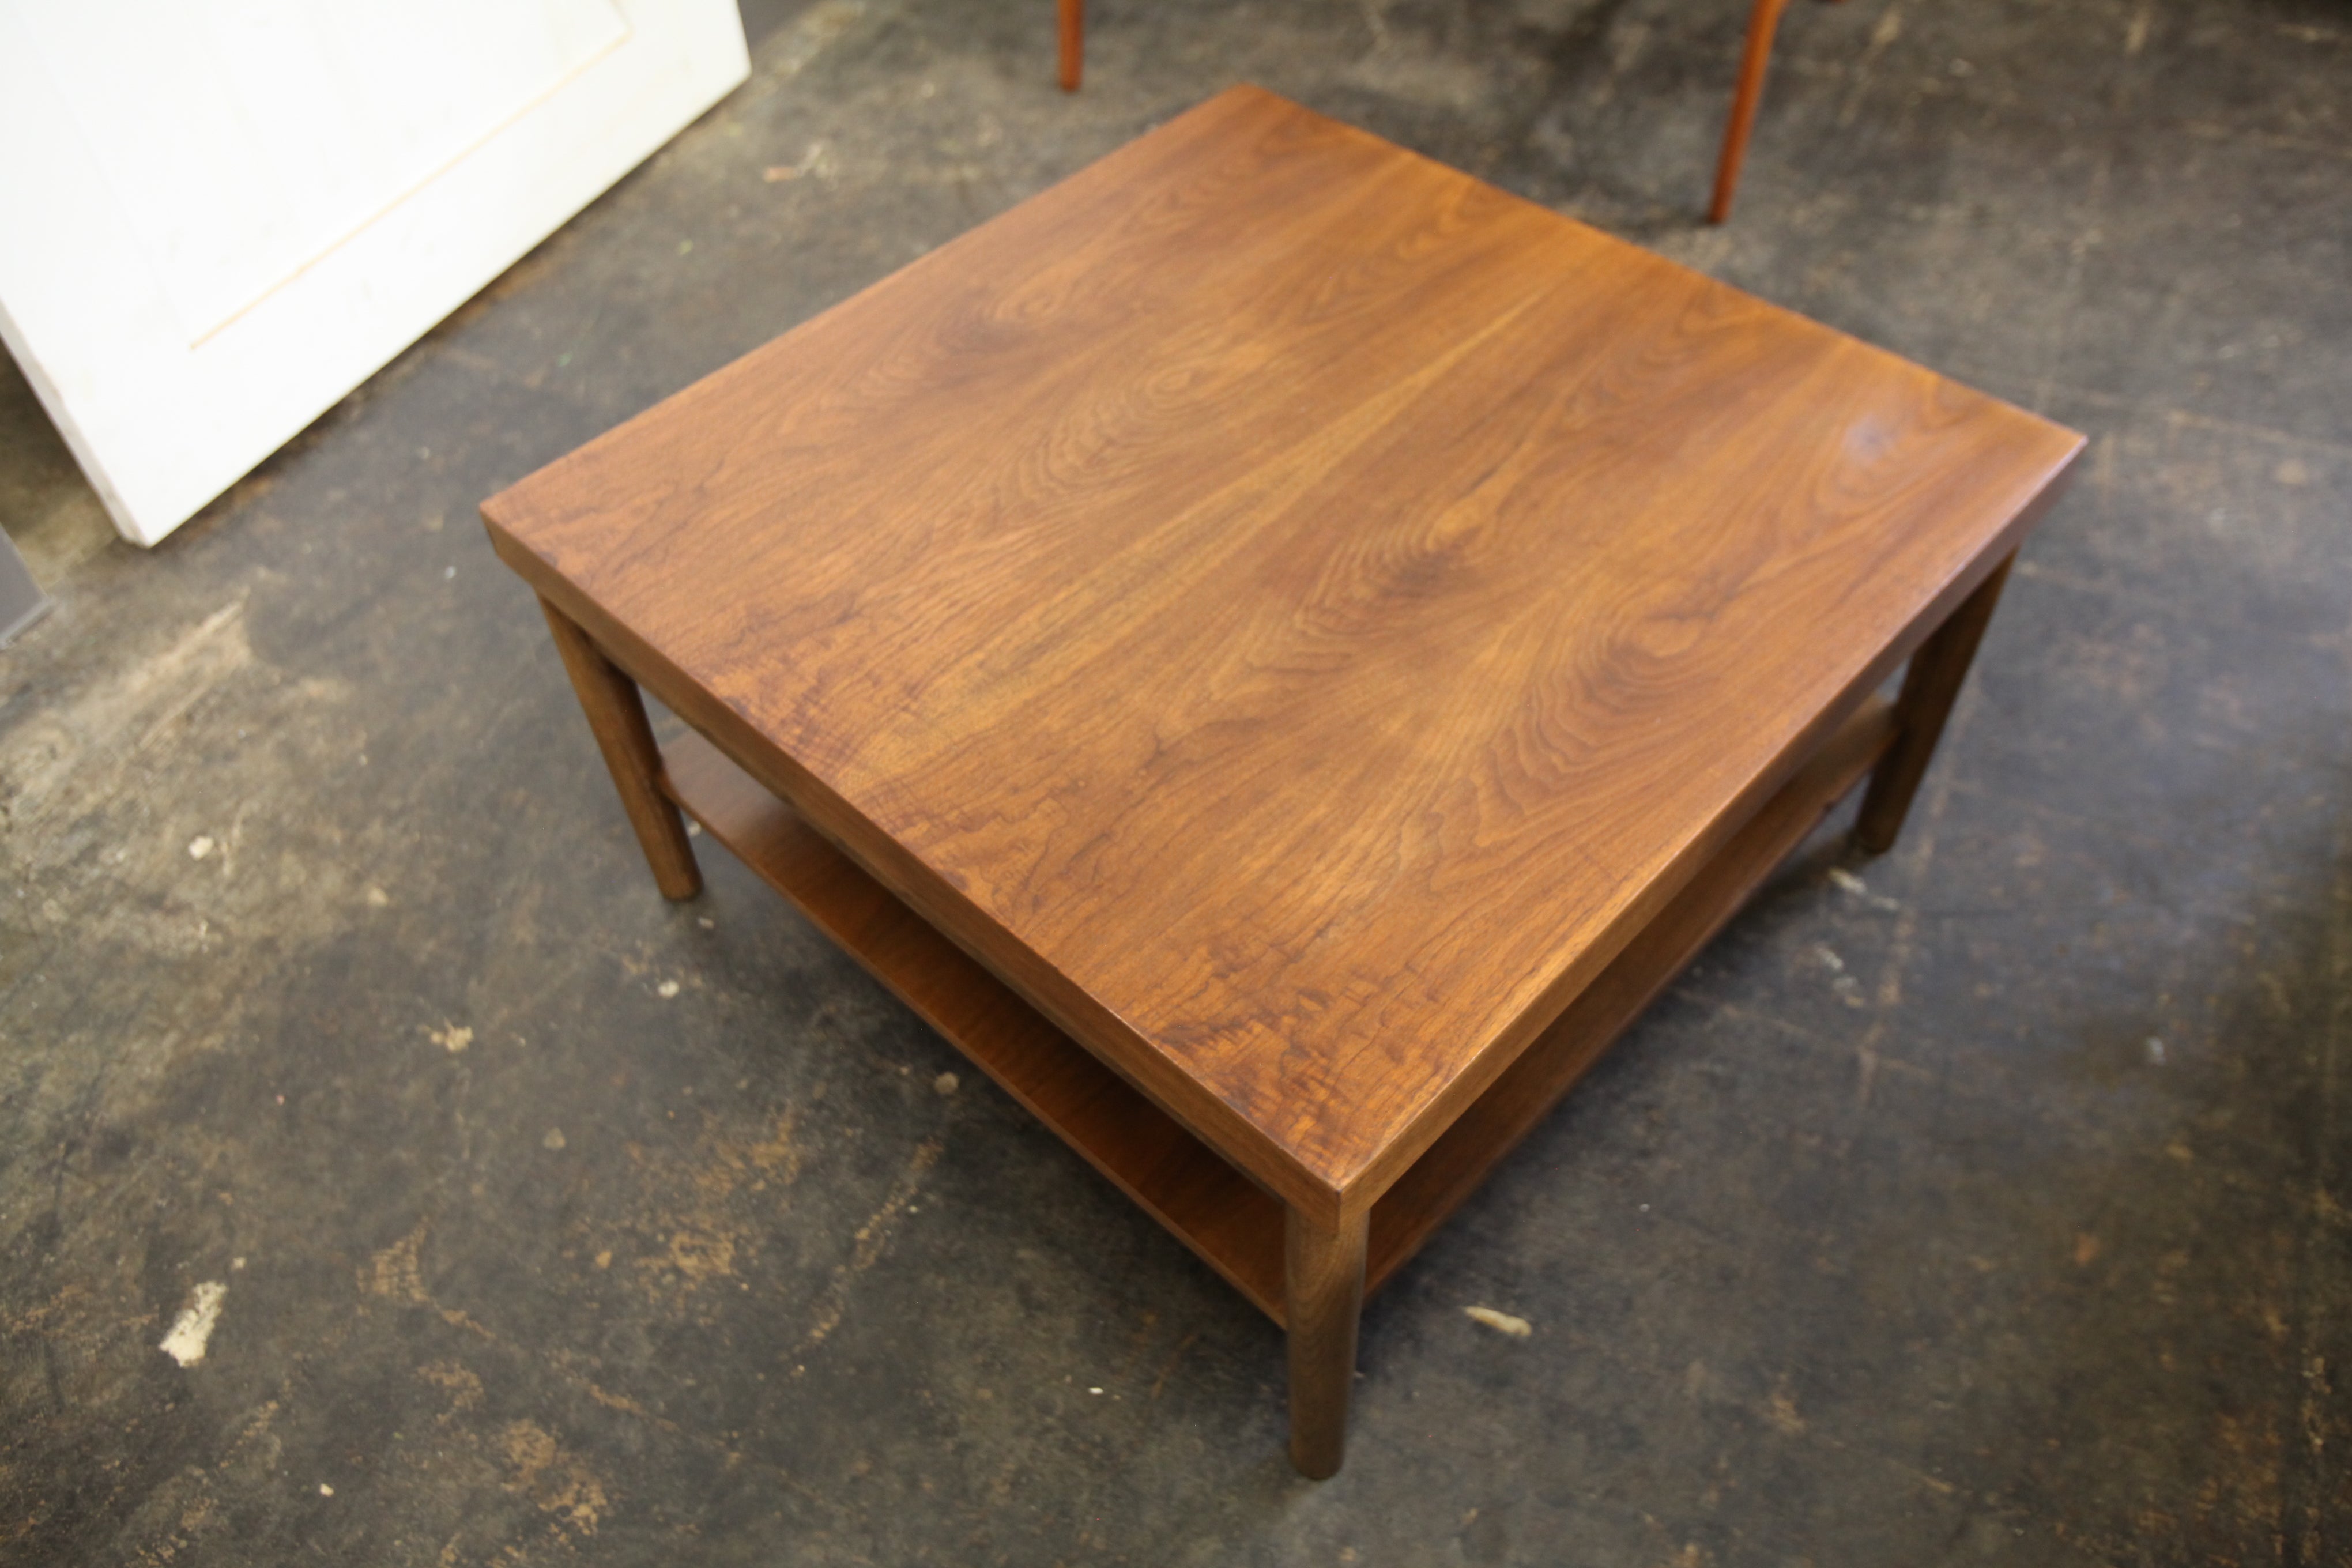 Vintage Square Walnut Coffe Table / Side Table (30"x 30" x 16"H)